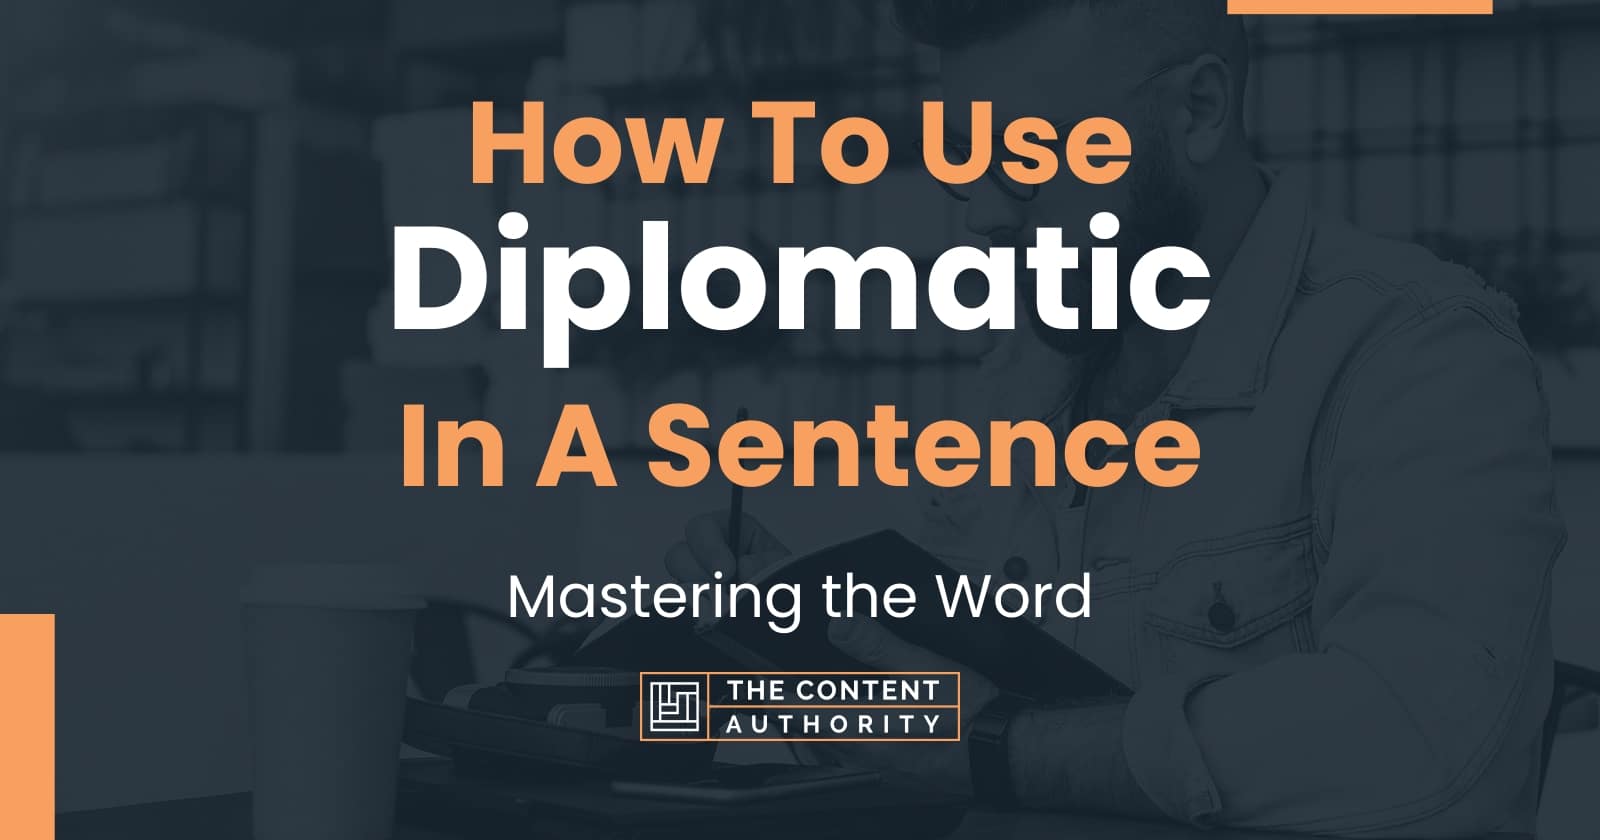 problem solving quizlet the word diplomatic means